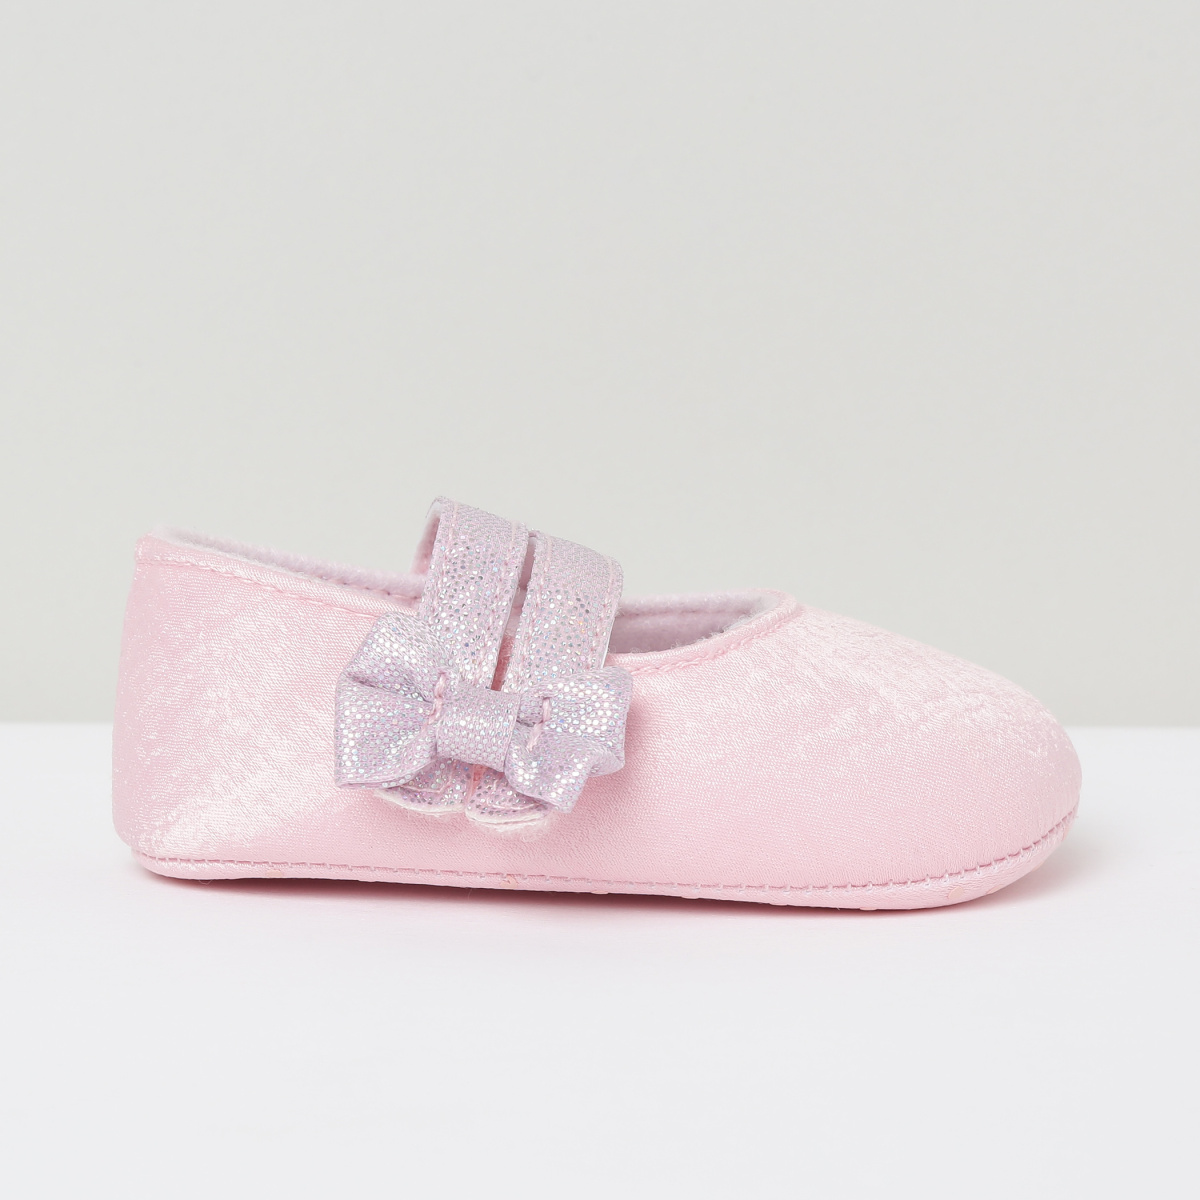 MAX Textured Mary Janes with Bow